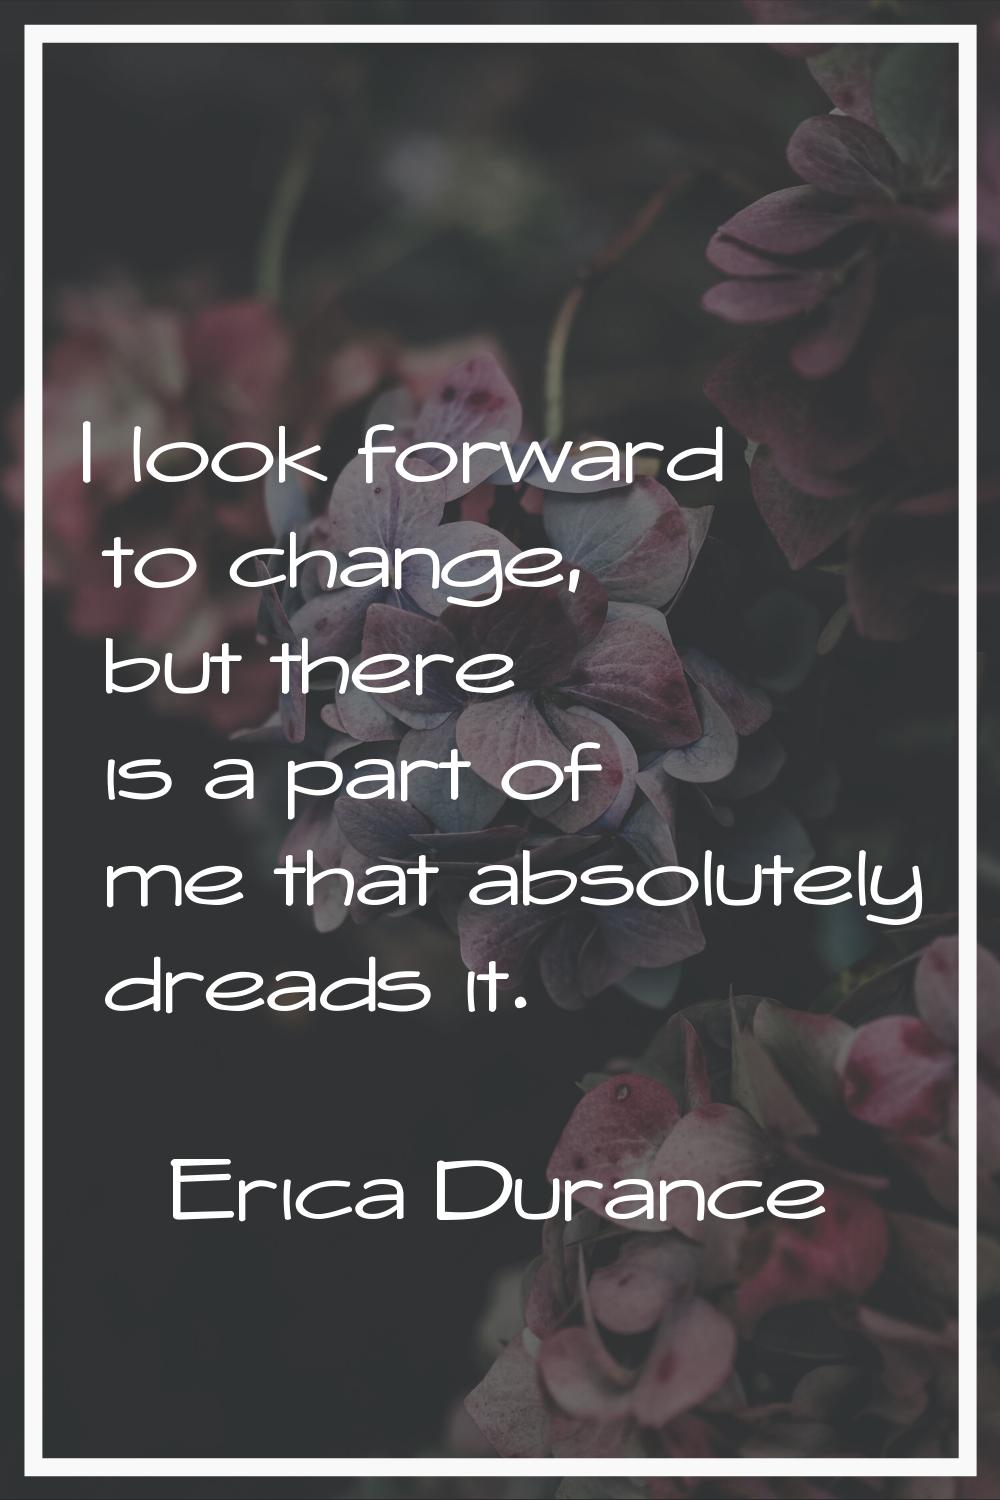 I look forward to change, but there is a part of me that absolutely dreads it.